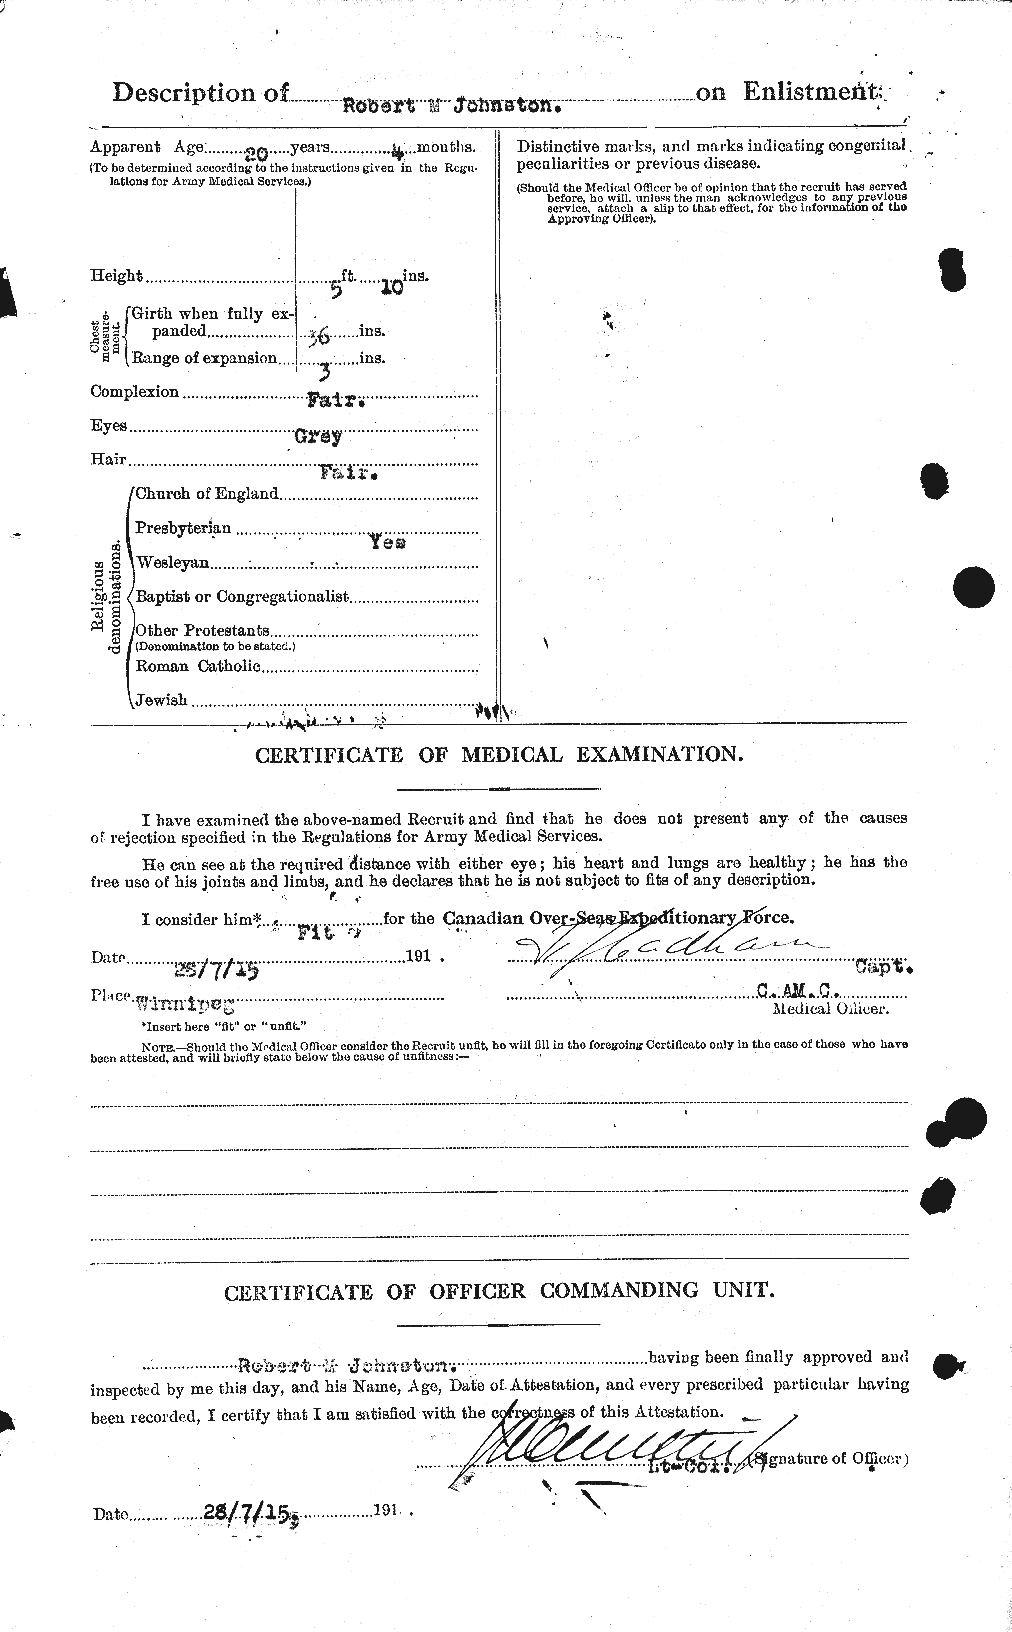 Personnel Records of the First World War - CEF 423067b